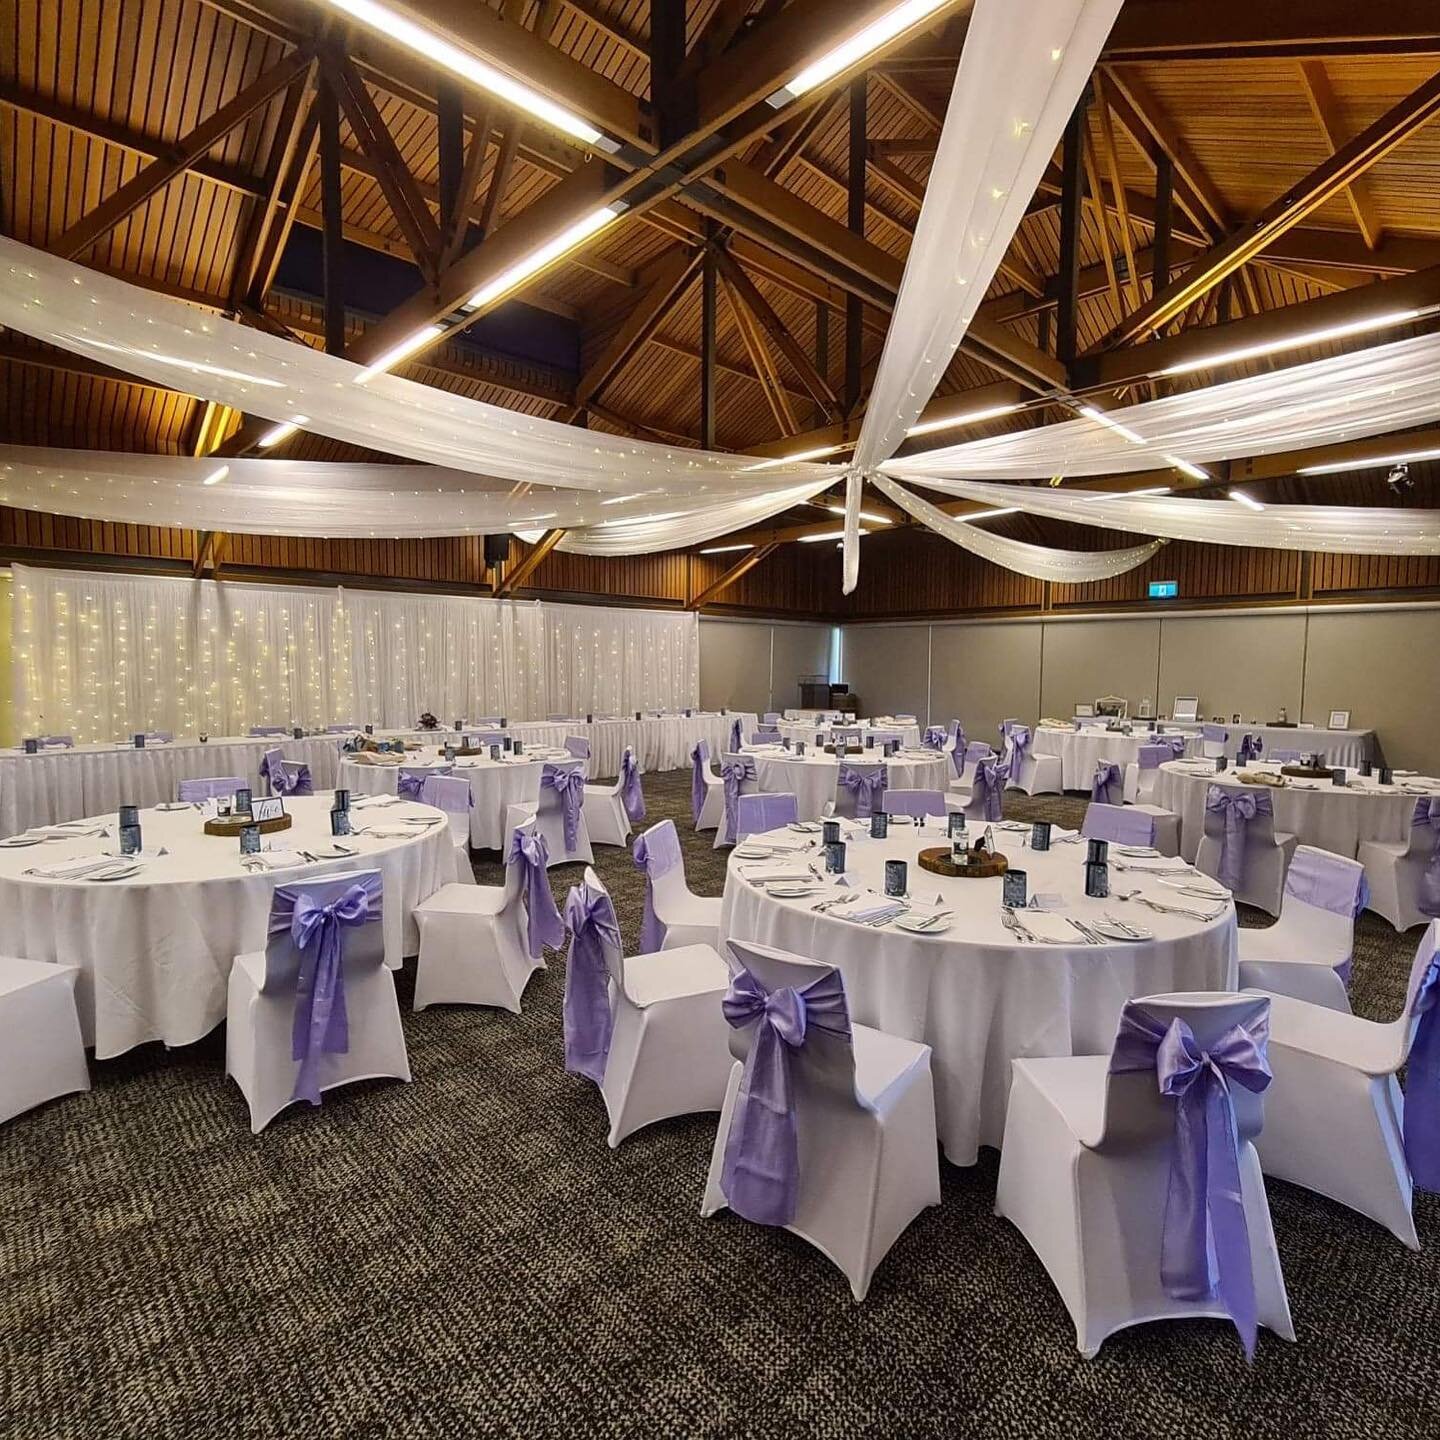 Wedding reception 💜 
We had the pleasure of supplying equipment, setting up &amp; packing down for this wedding reception @tarongawesternplainszoo last weekend. 
Equipment hire: chair covers, chair sashes, 3x9m white chiffon material backdrop with w